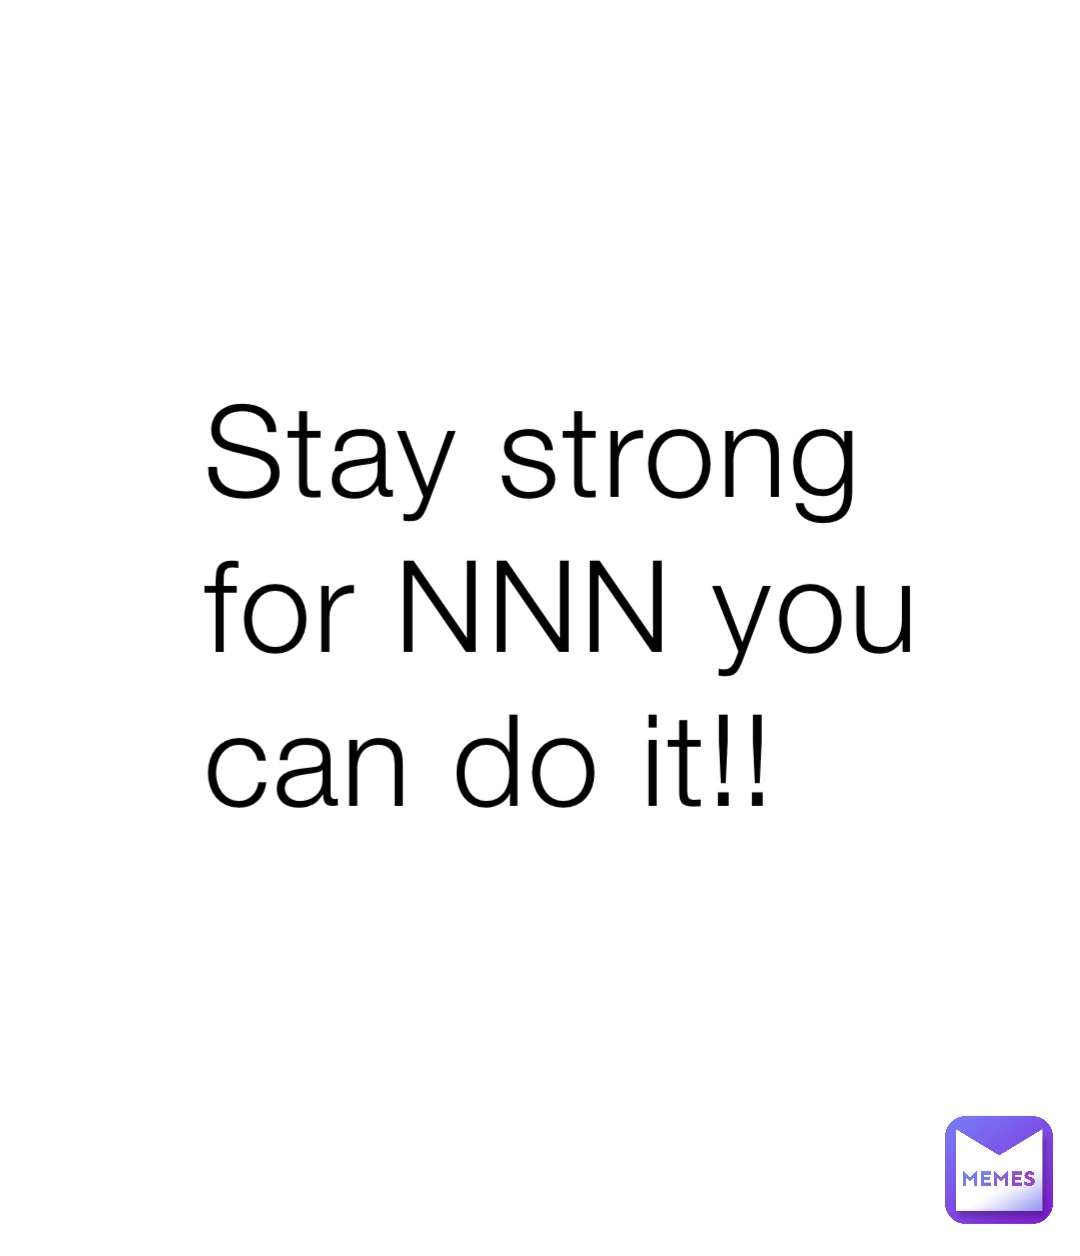 Stay strong for NNN you can do it!!